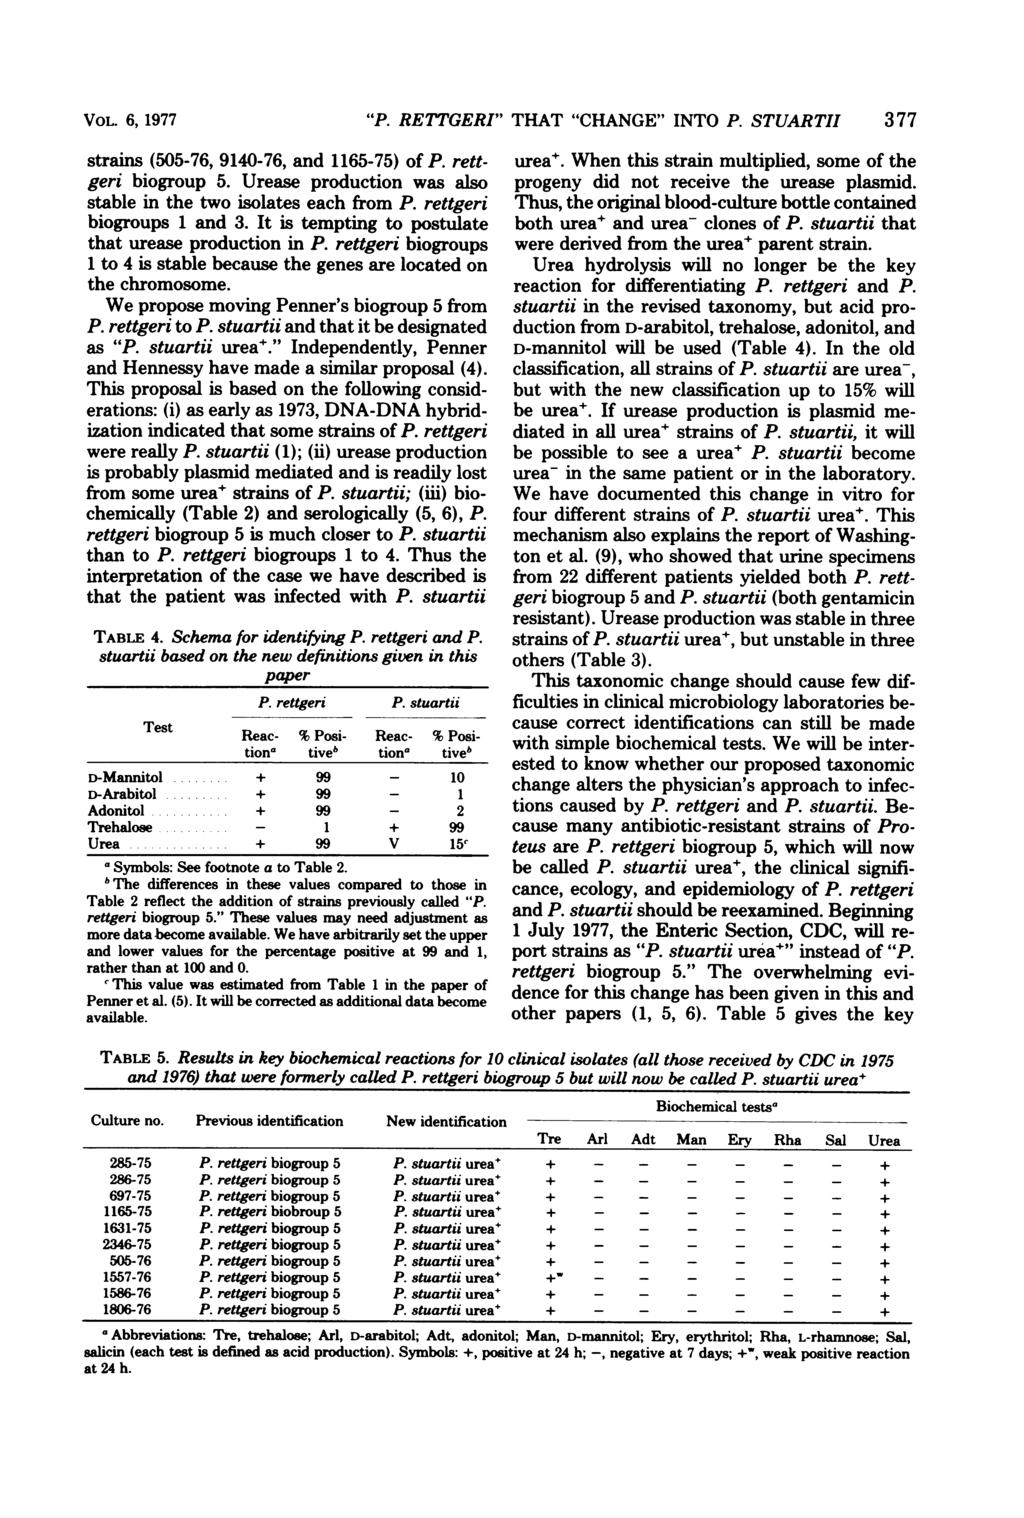 VOL. 6, 1977 strains (55-76, 914-76, and 1165-75) of P. rettgeri biogroup 5. Urease production was also stable in the two isolates each from P. rettgeri biogroups 1 and 3.